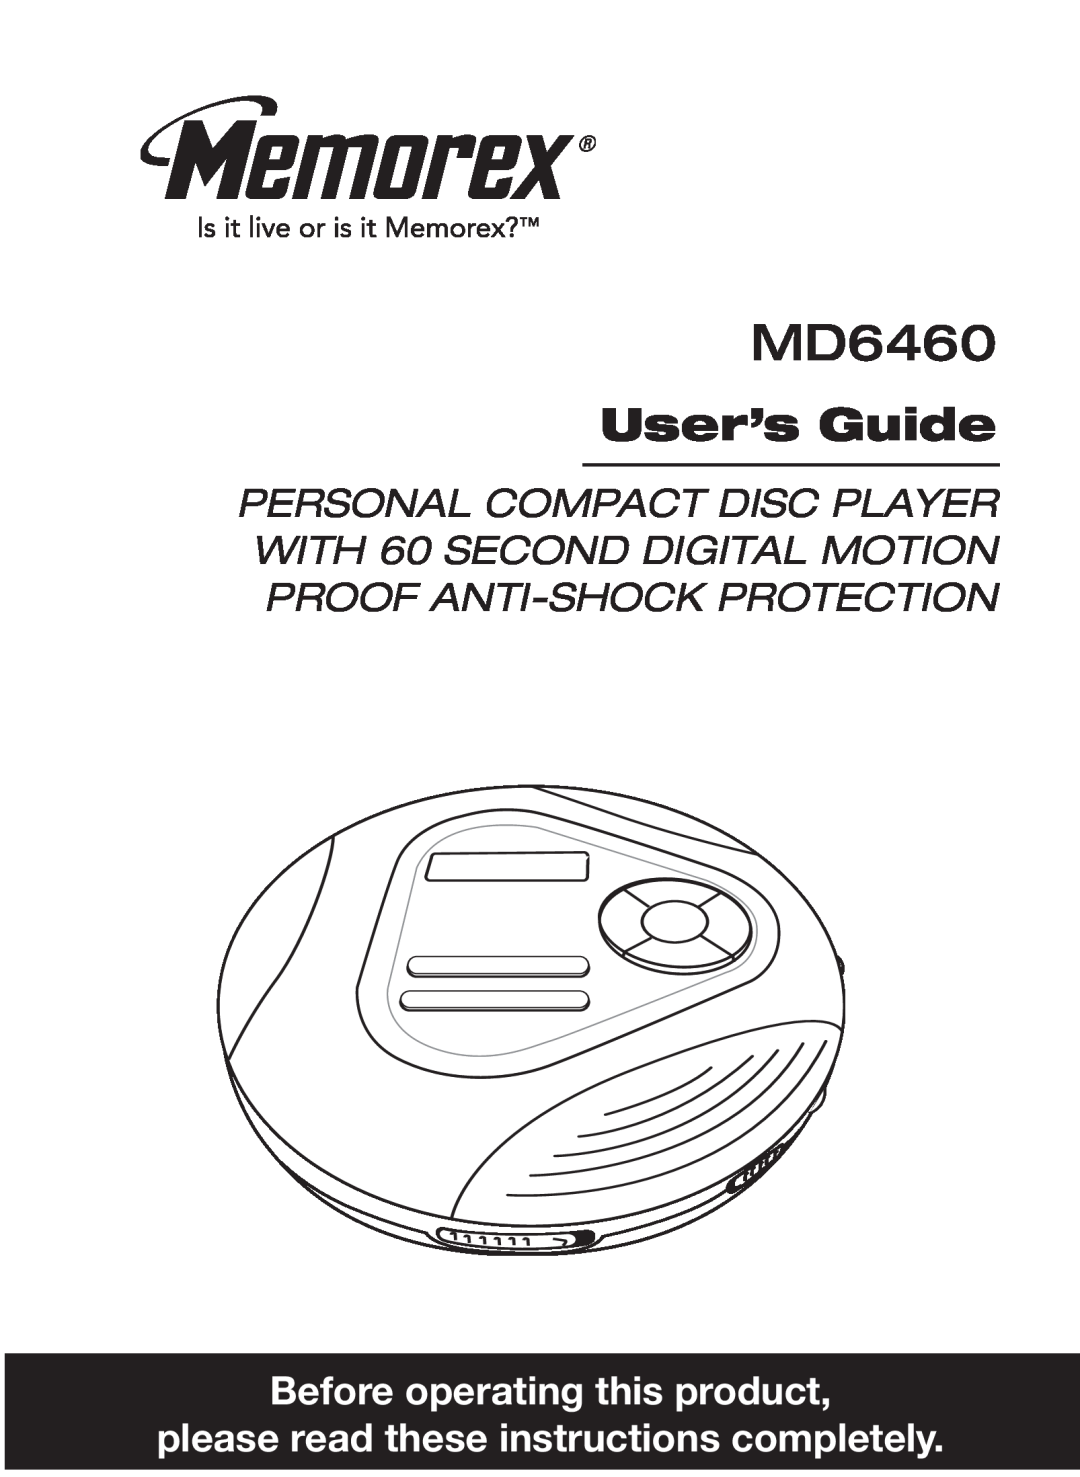 Memorex MD6460 manual User’s Guide, Before operating this product, please read these instructions completely 